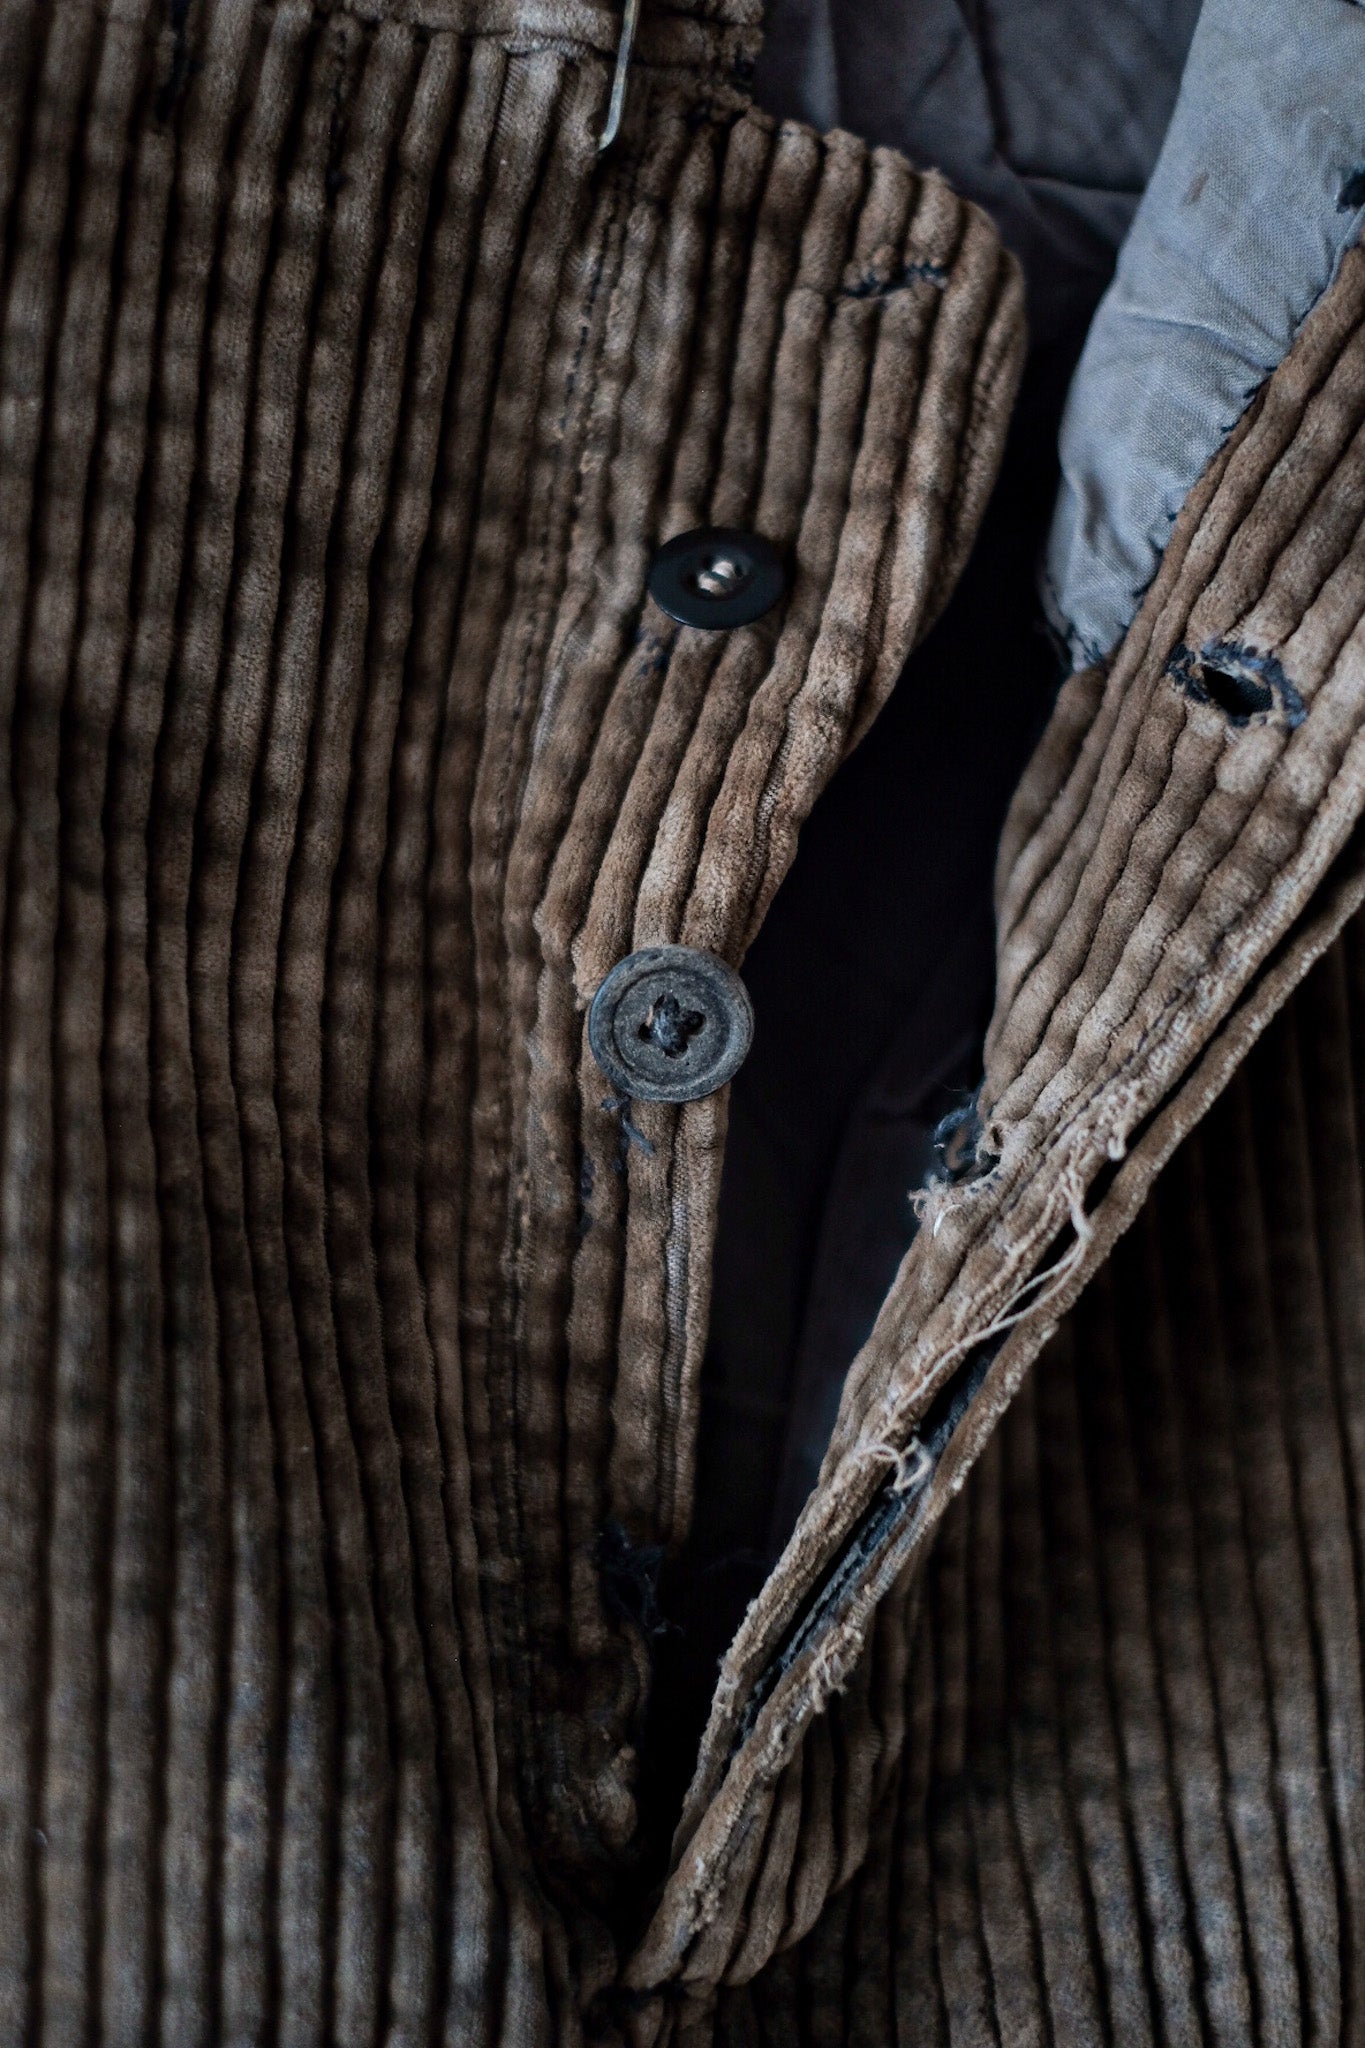 [~ 30's] French Vintage Brown Corduroy Work Pants "Adolphe Lafont"